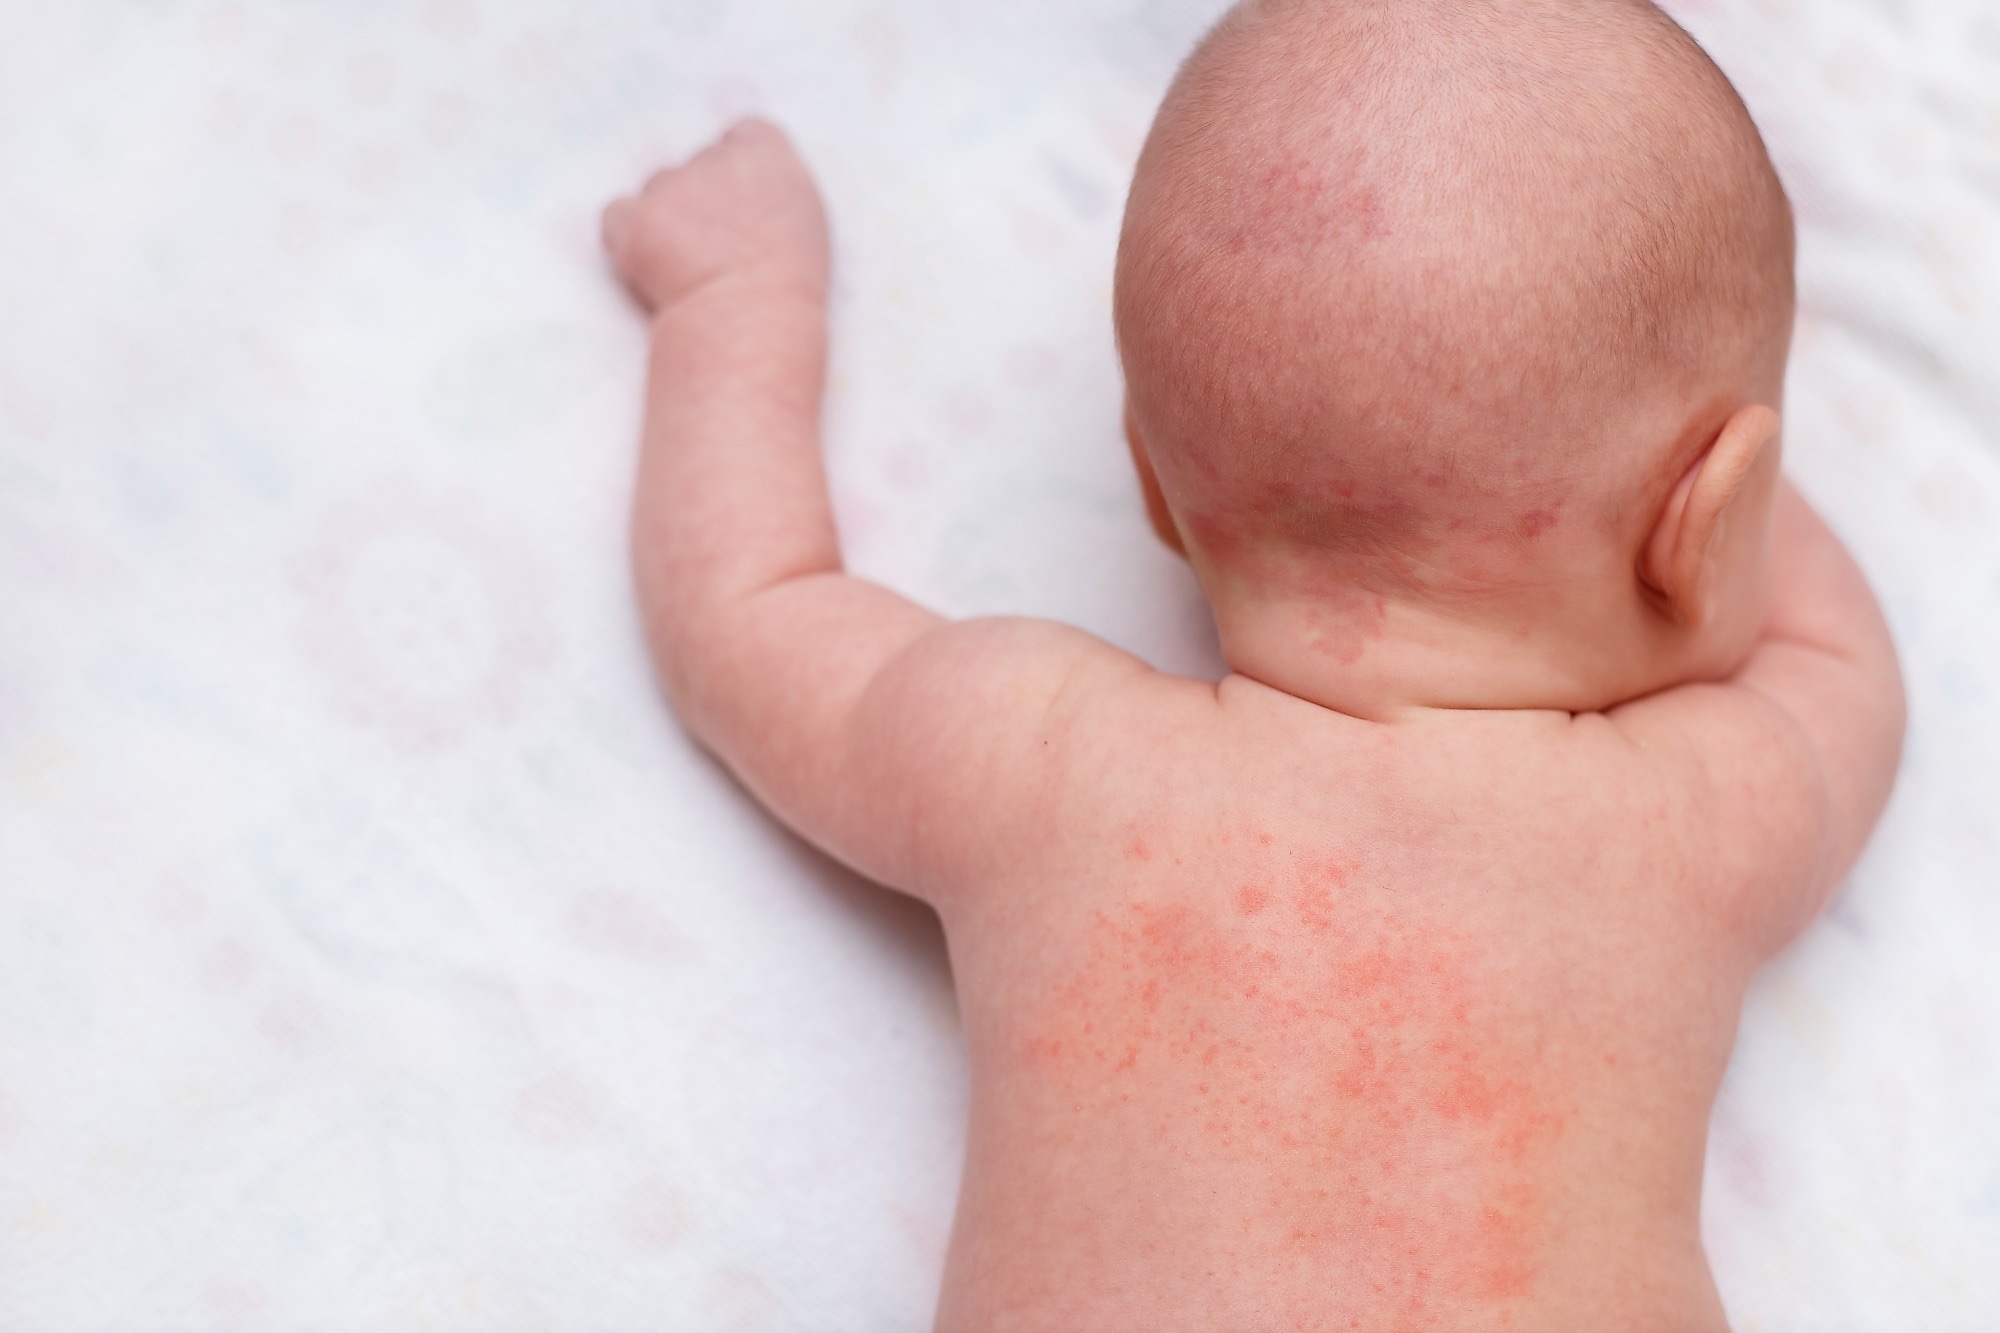 Study: Dupilumab in children aged 6 months to younger than 6 years with uncontrolled atopic dermatitis: a randomised, double-blind, placebo-controlled, phase 3 trial​​​​​​​. Image Credit: Aisylu Ahmadieva / Shutterstock